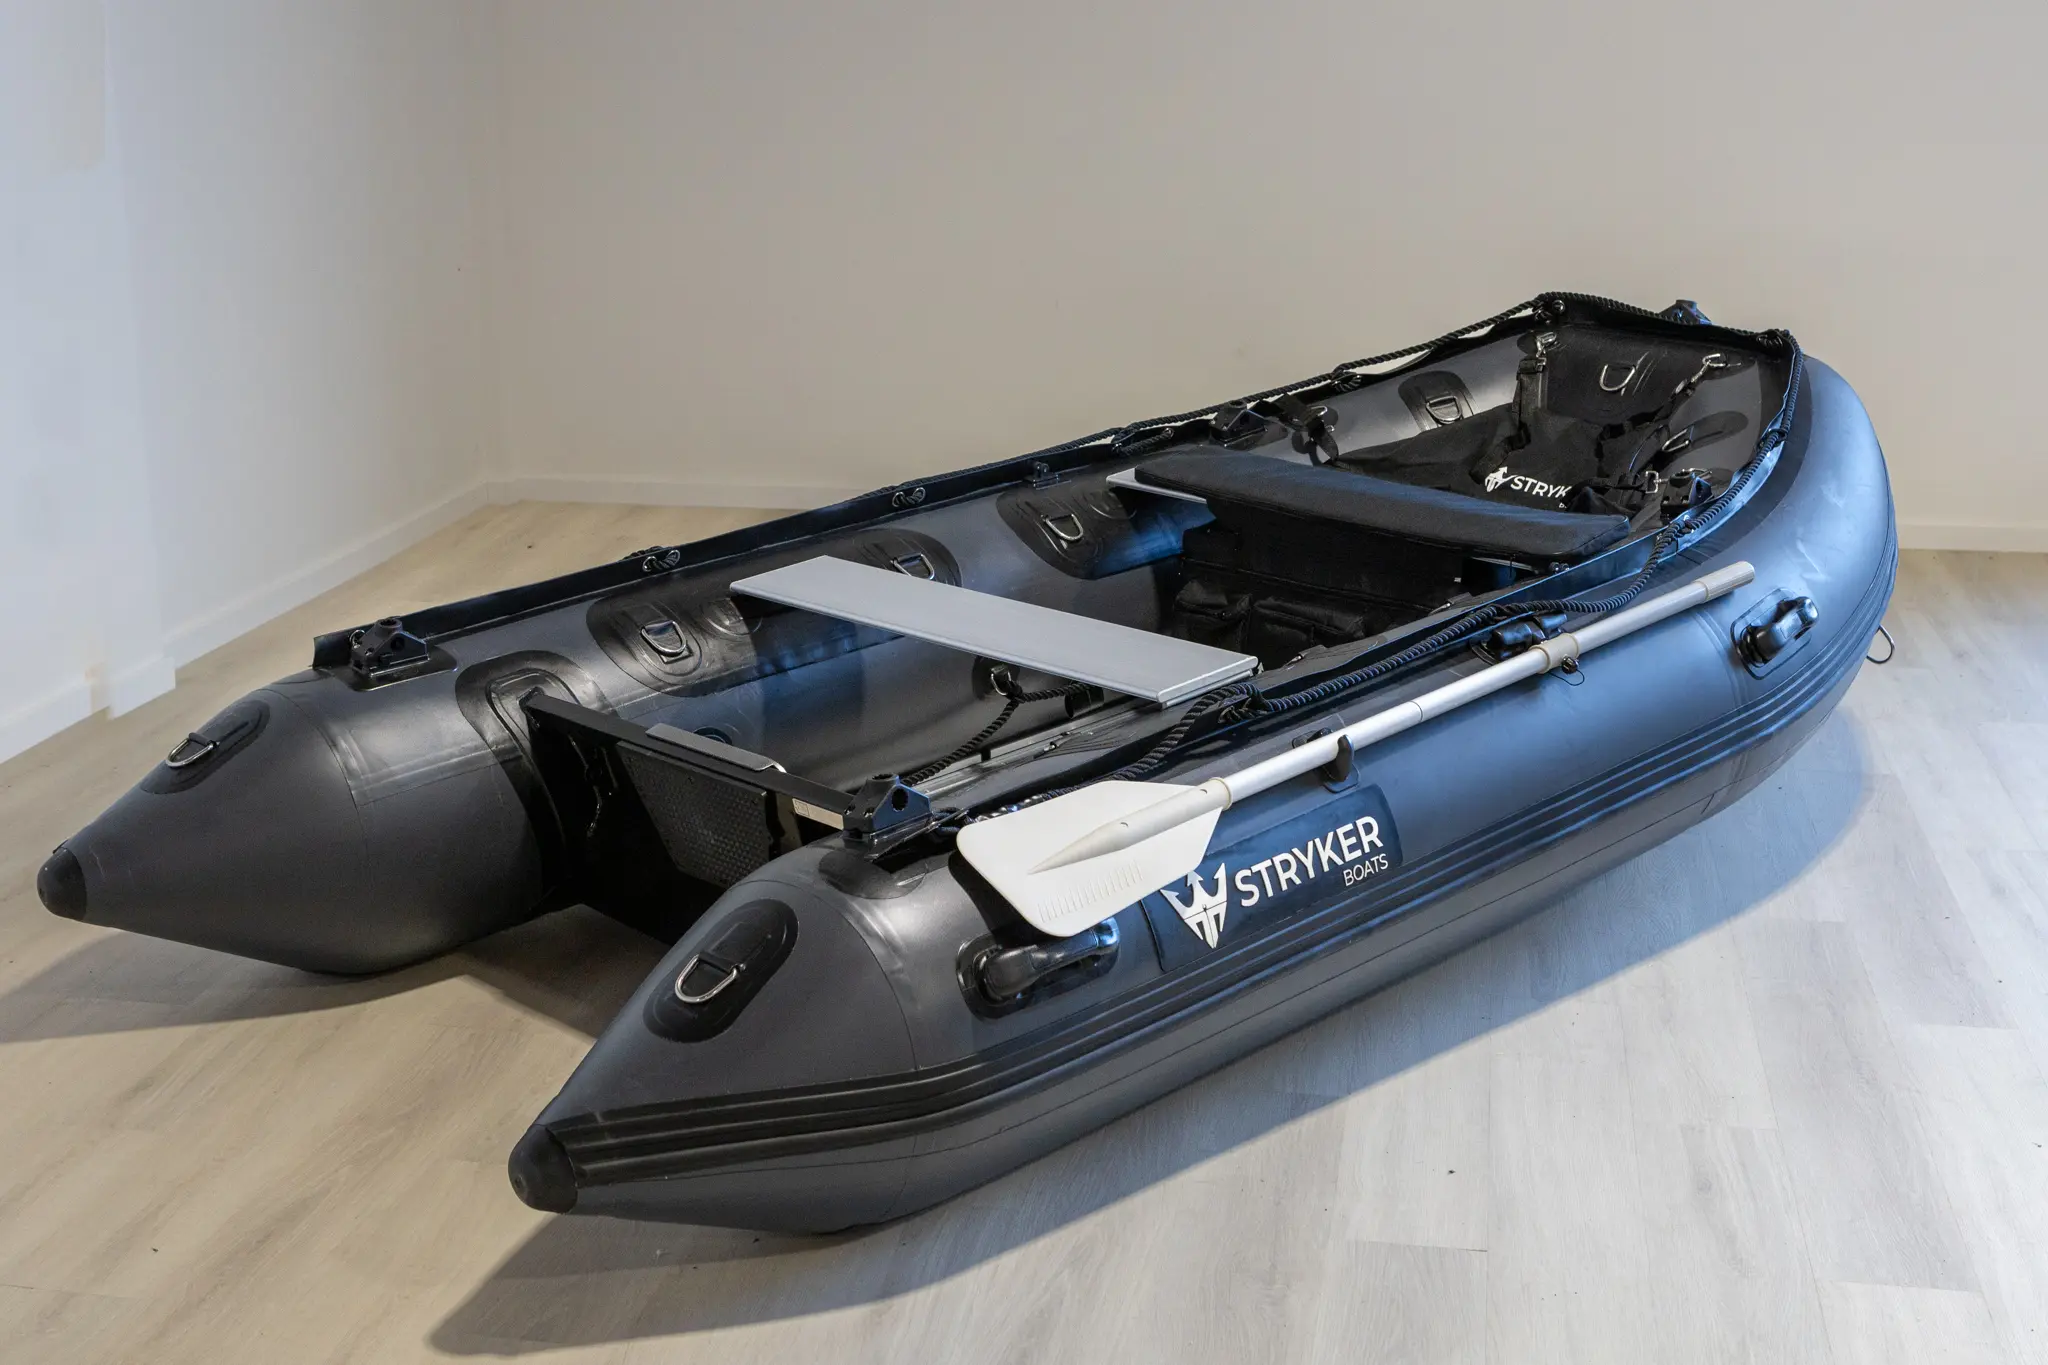 Stryker LX 320 (10' 5”) Inflatable Boat